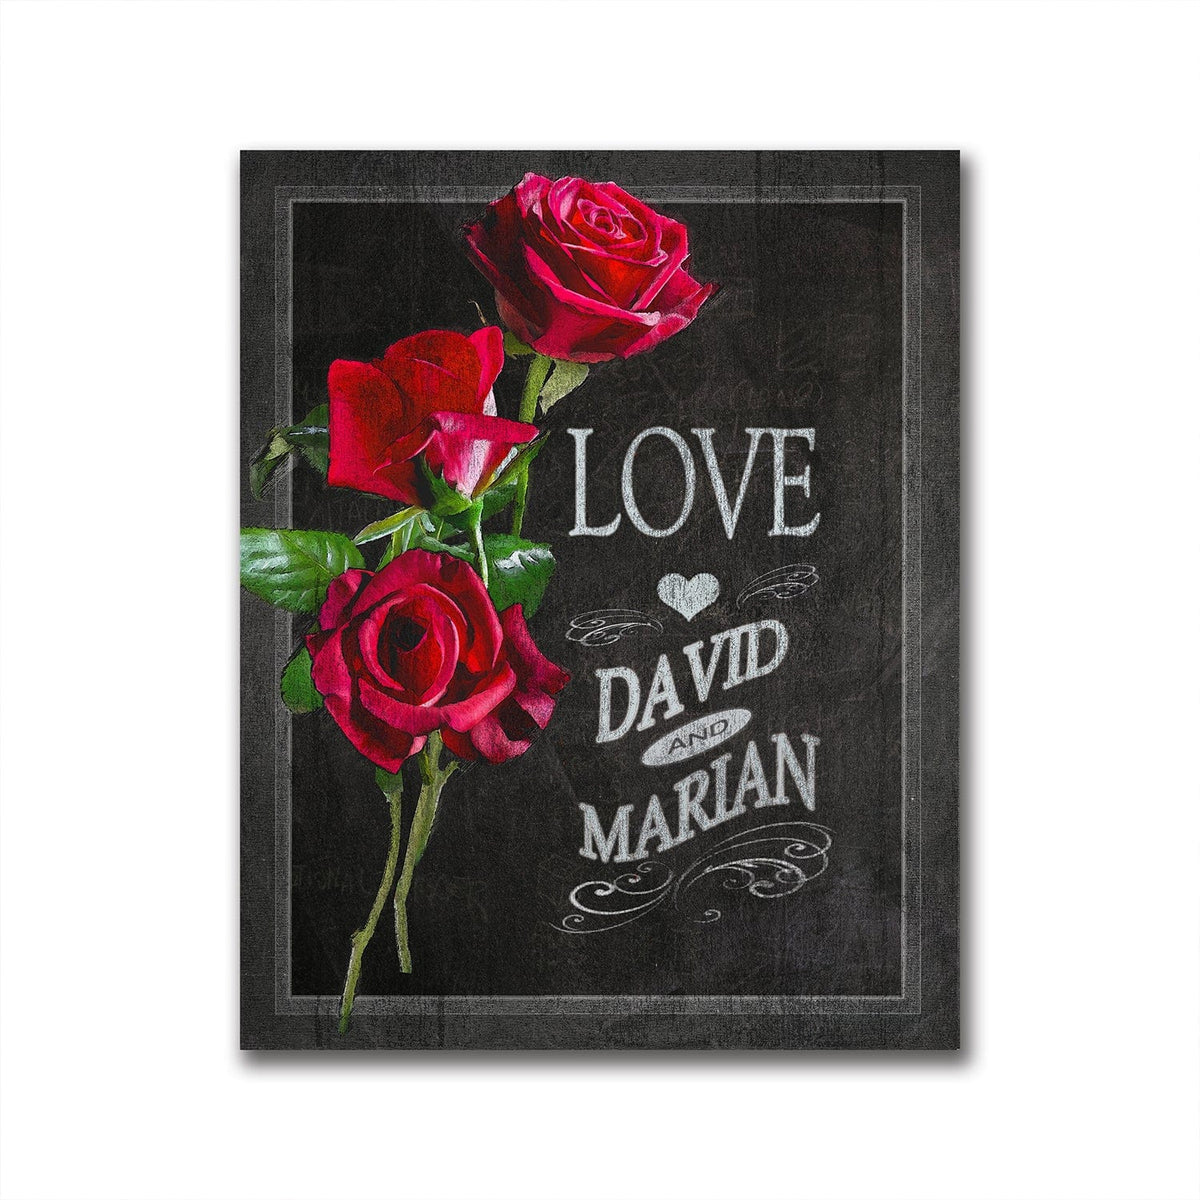 Romantic personalized gift - Chalkboard art - Roses